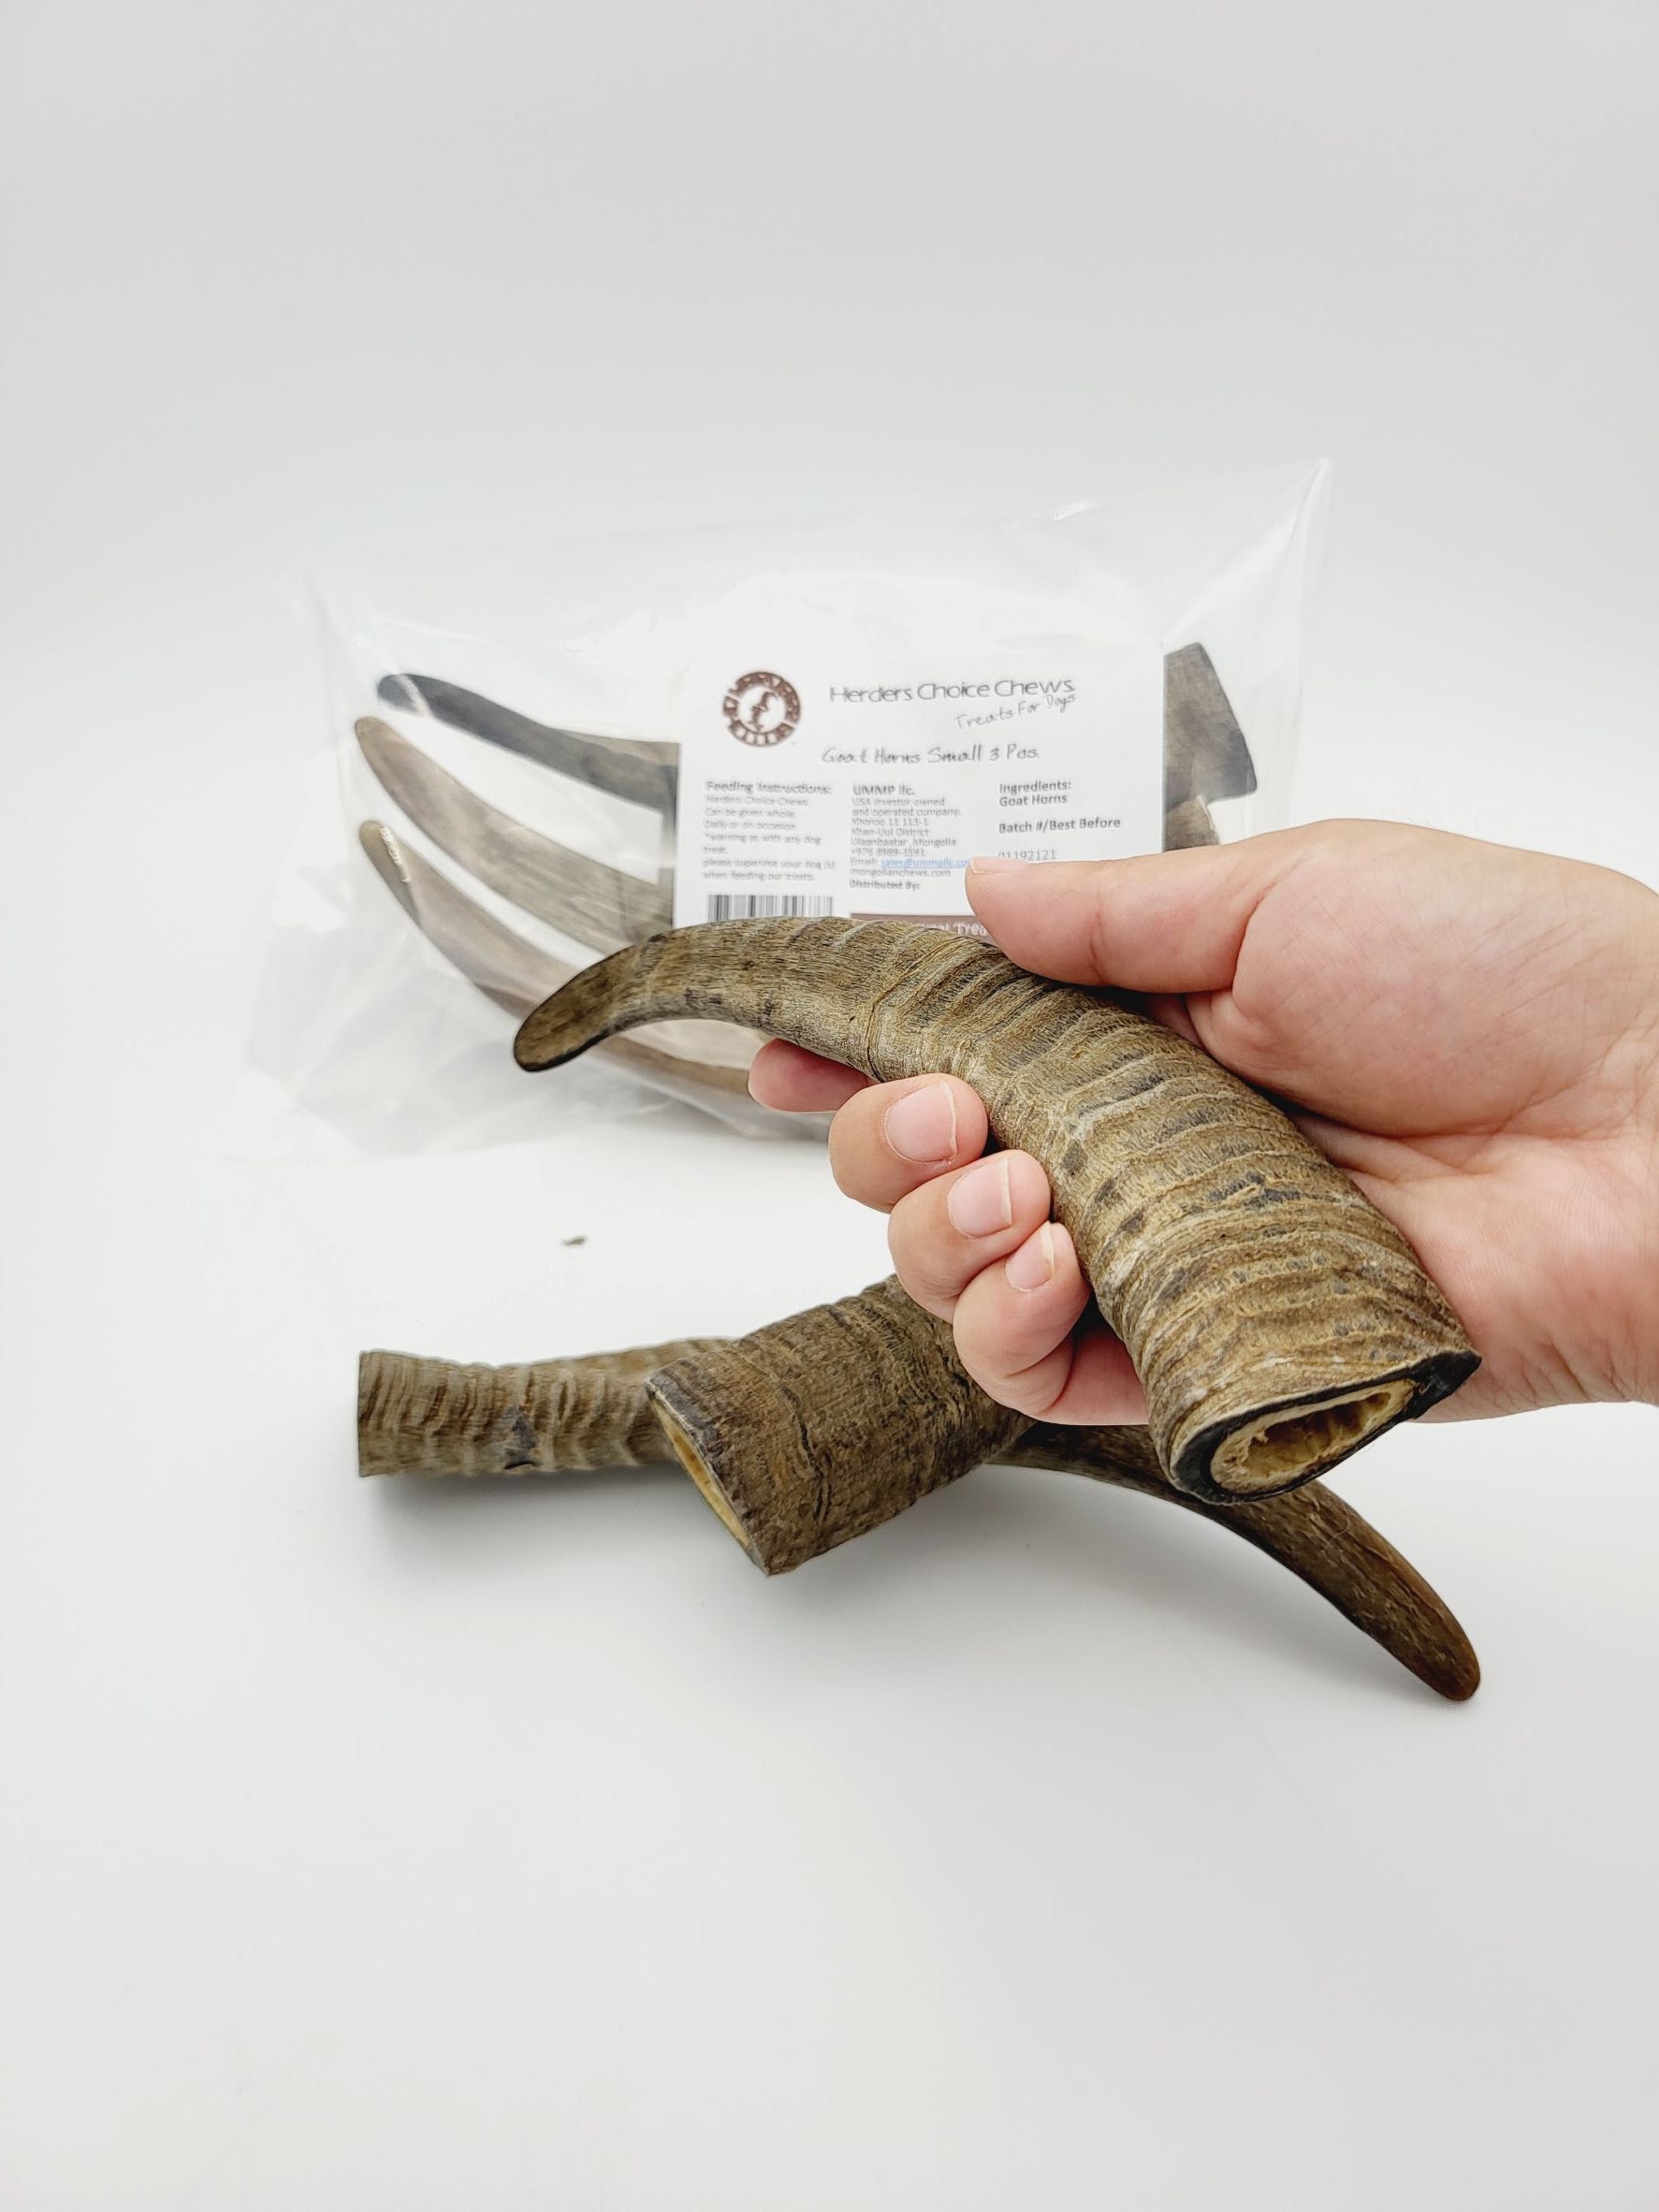 🐐 Introducing GOAT horn: the ultimate dog chew - Mongolian Chews